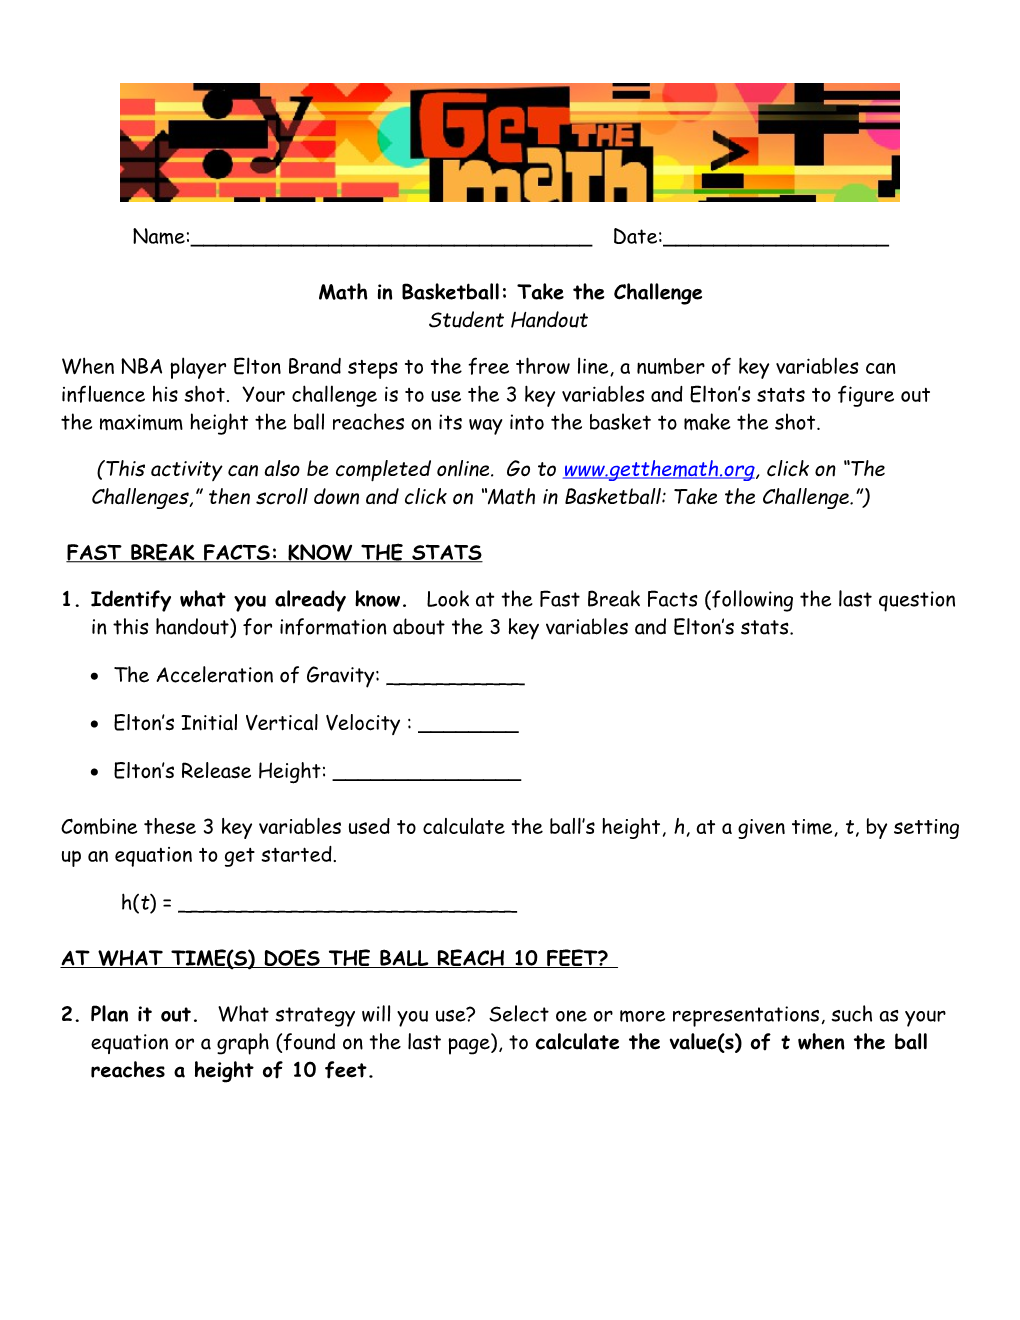 Math in Basketball: Take the Challenge Student Handout